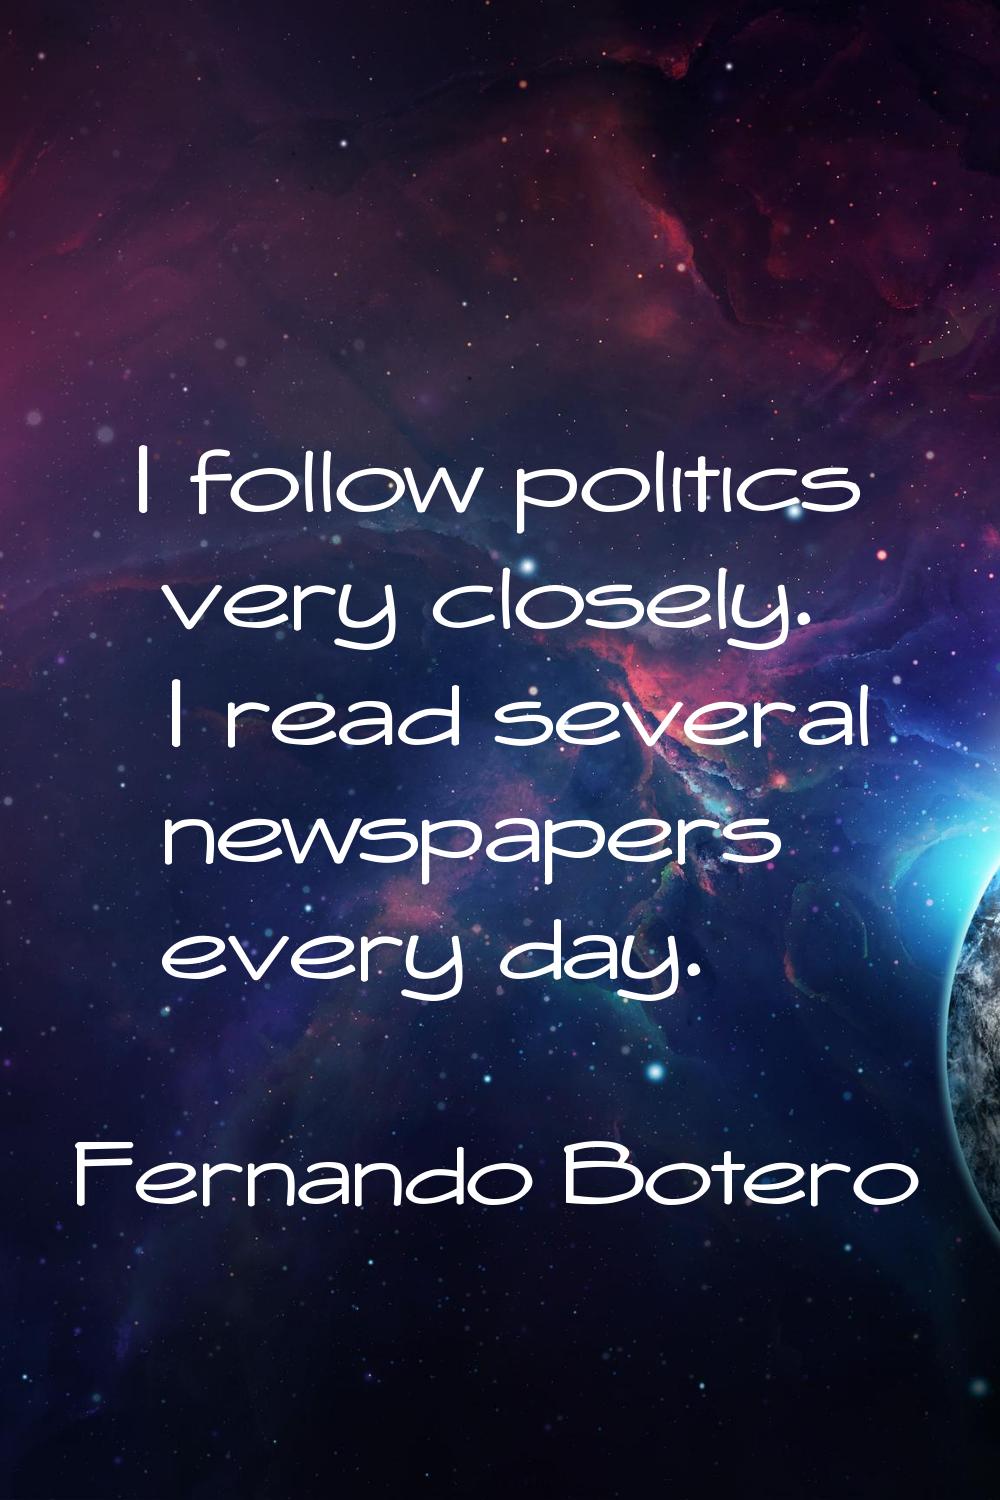 I follow politics very closely. I read several newspapers every day.